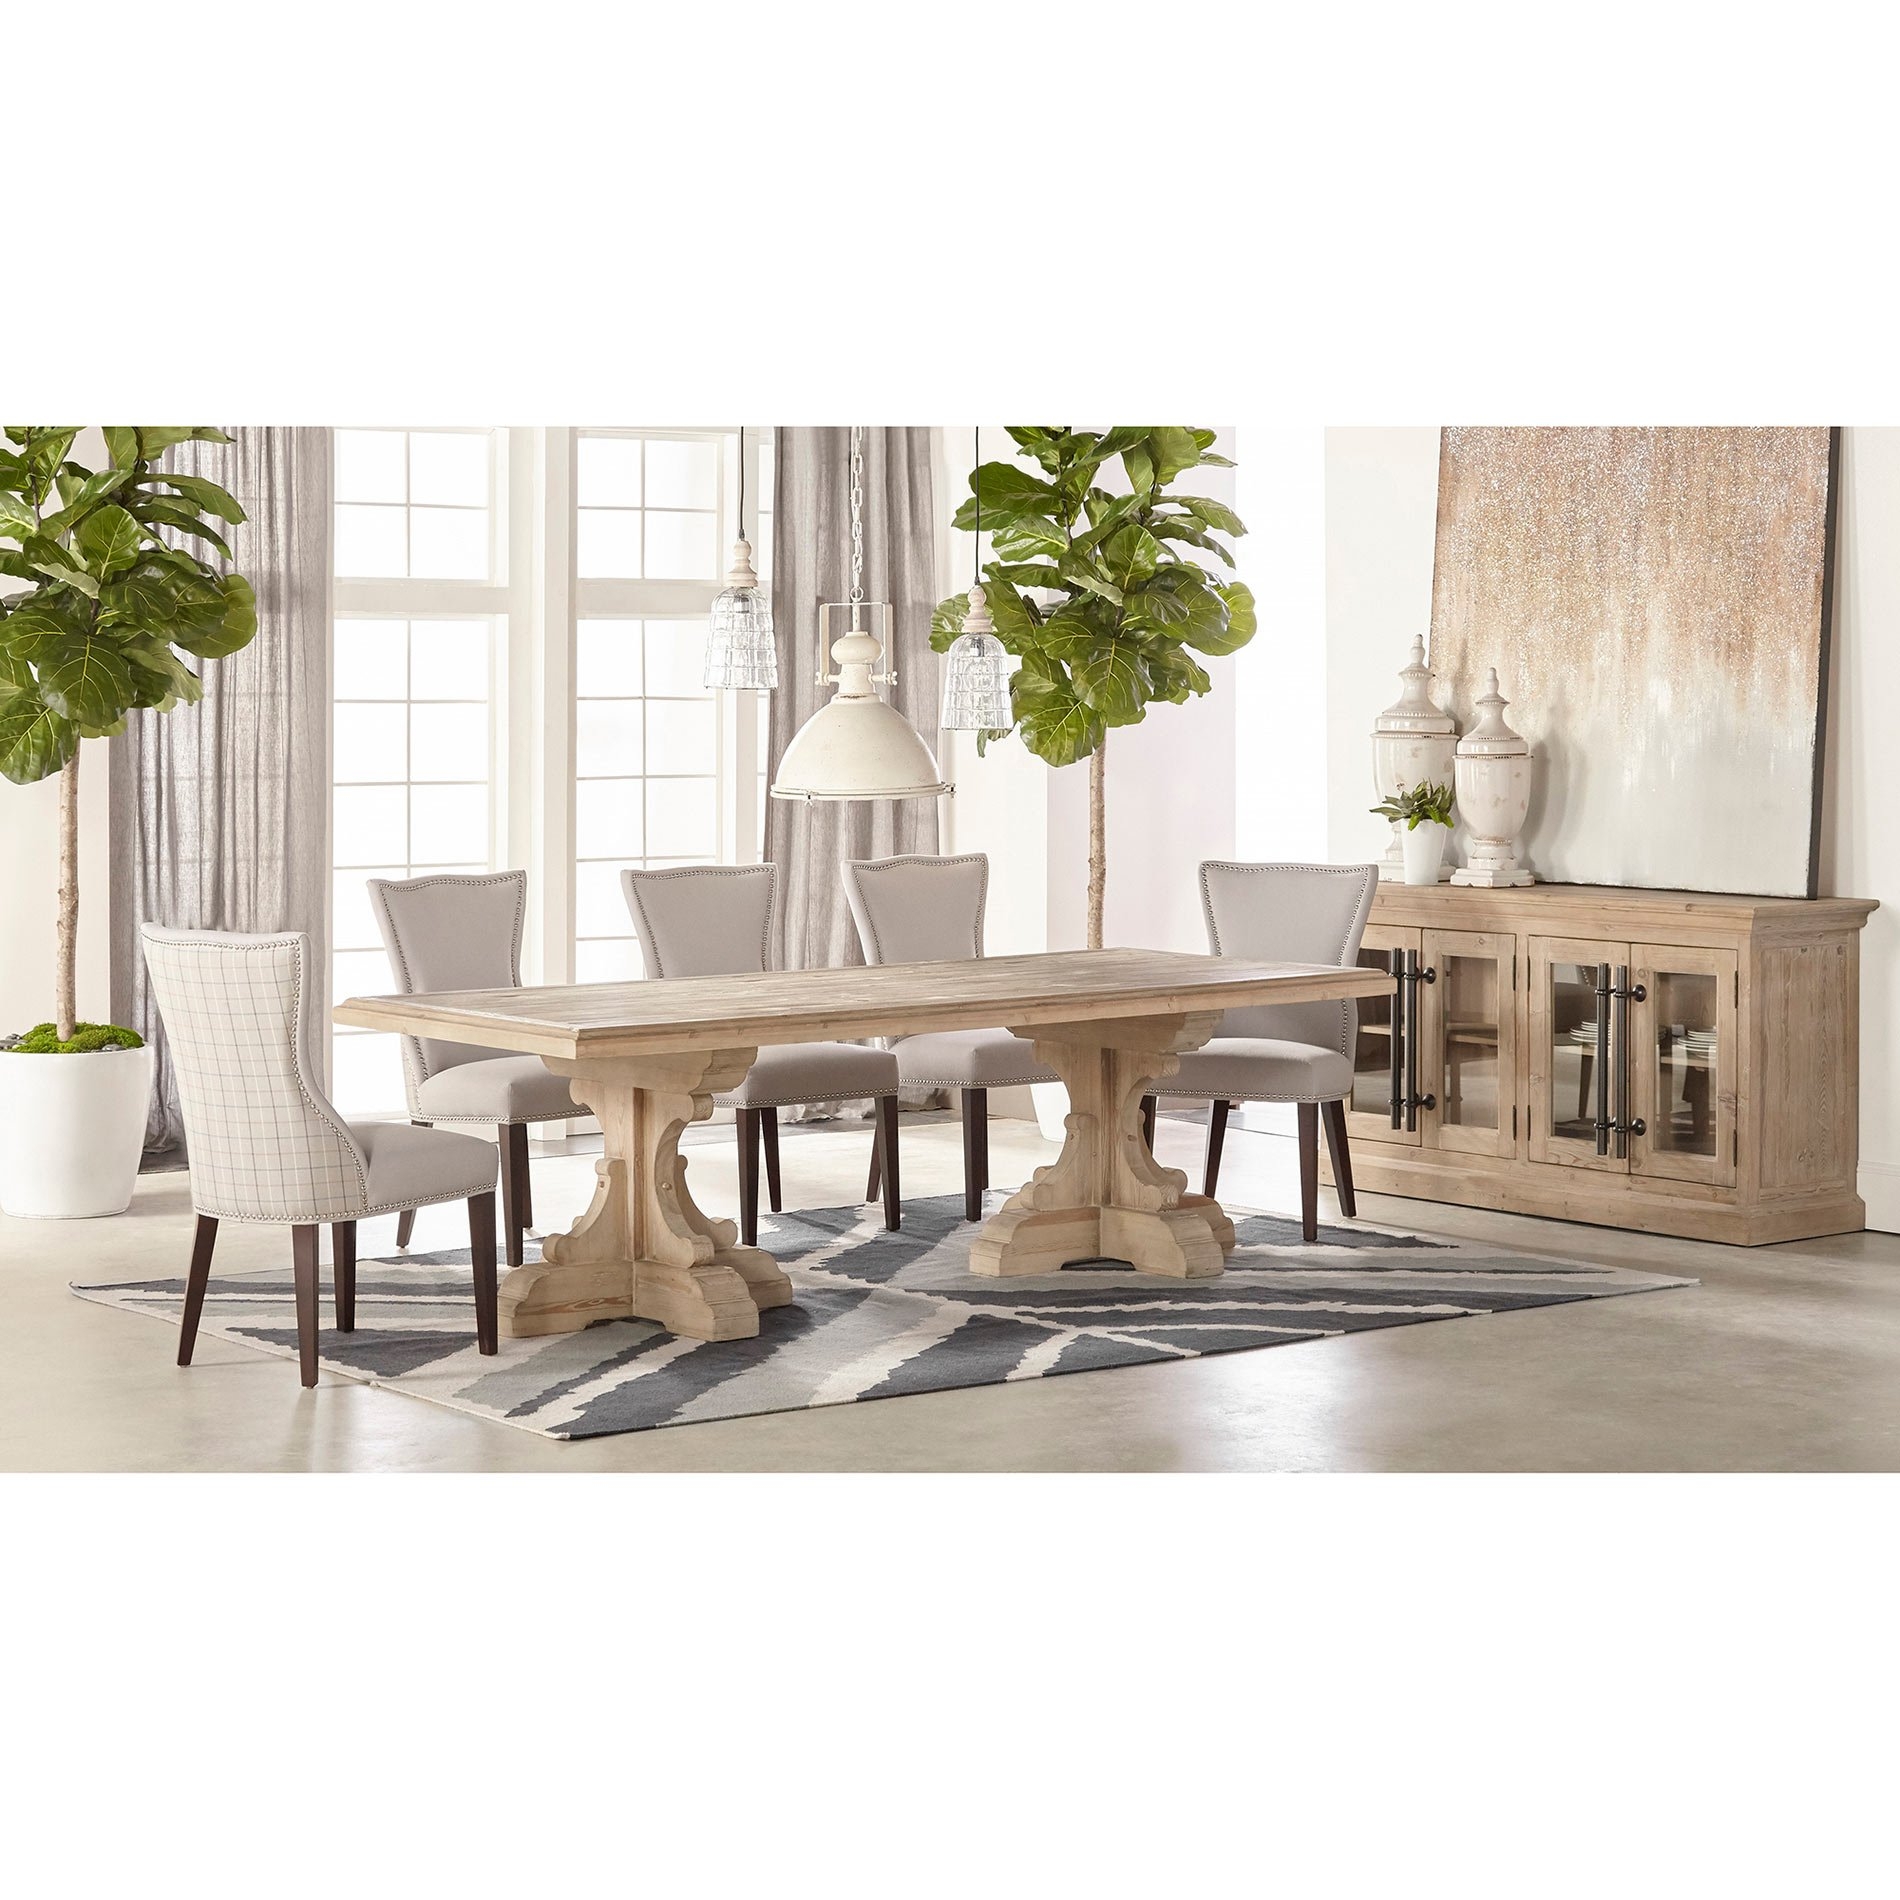 Britney Modern Classic Natural Brown Pine Wood Rectangular Dining Table - Image 6